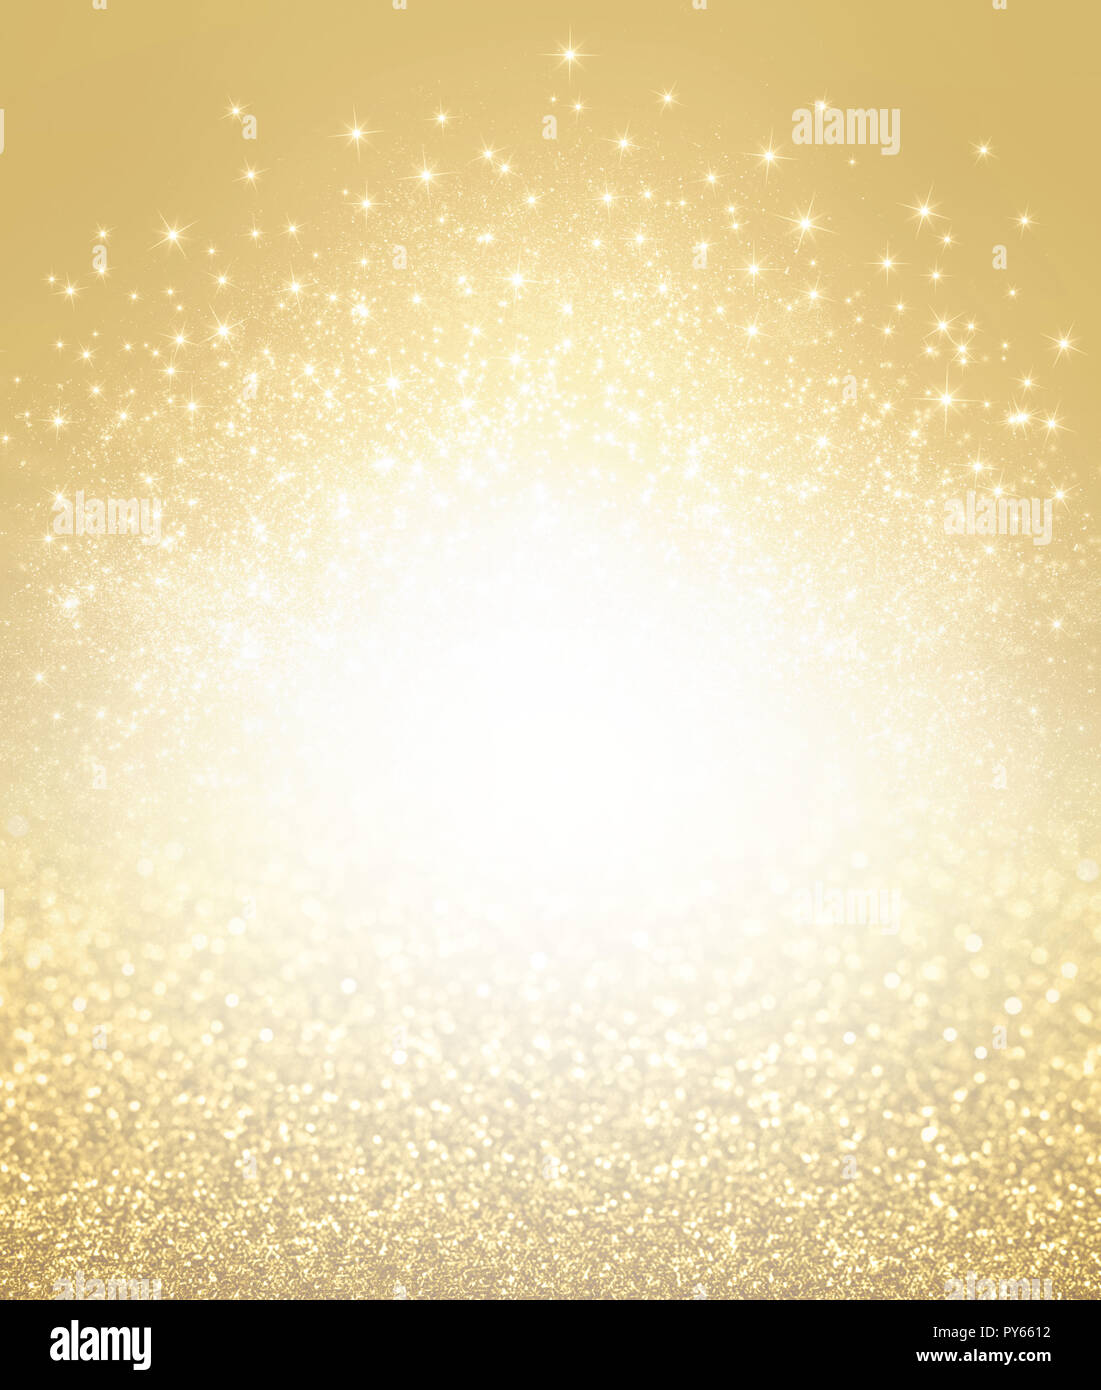 Glittering defocused gold background with shining stars exploding - Festive material Stock Photo